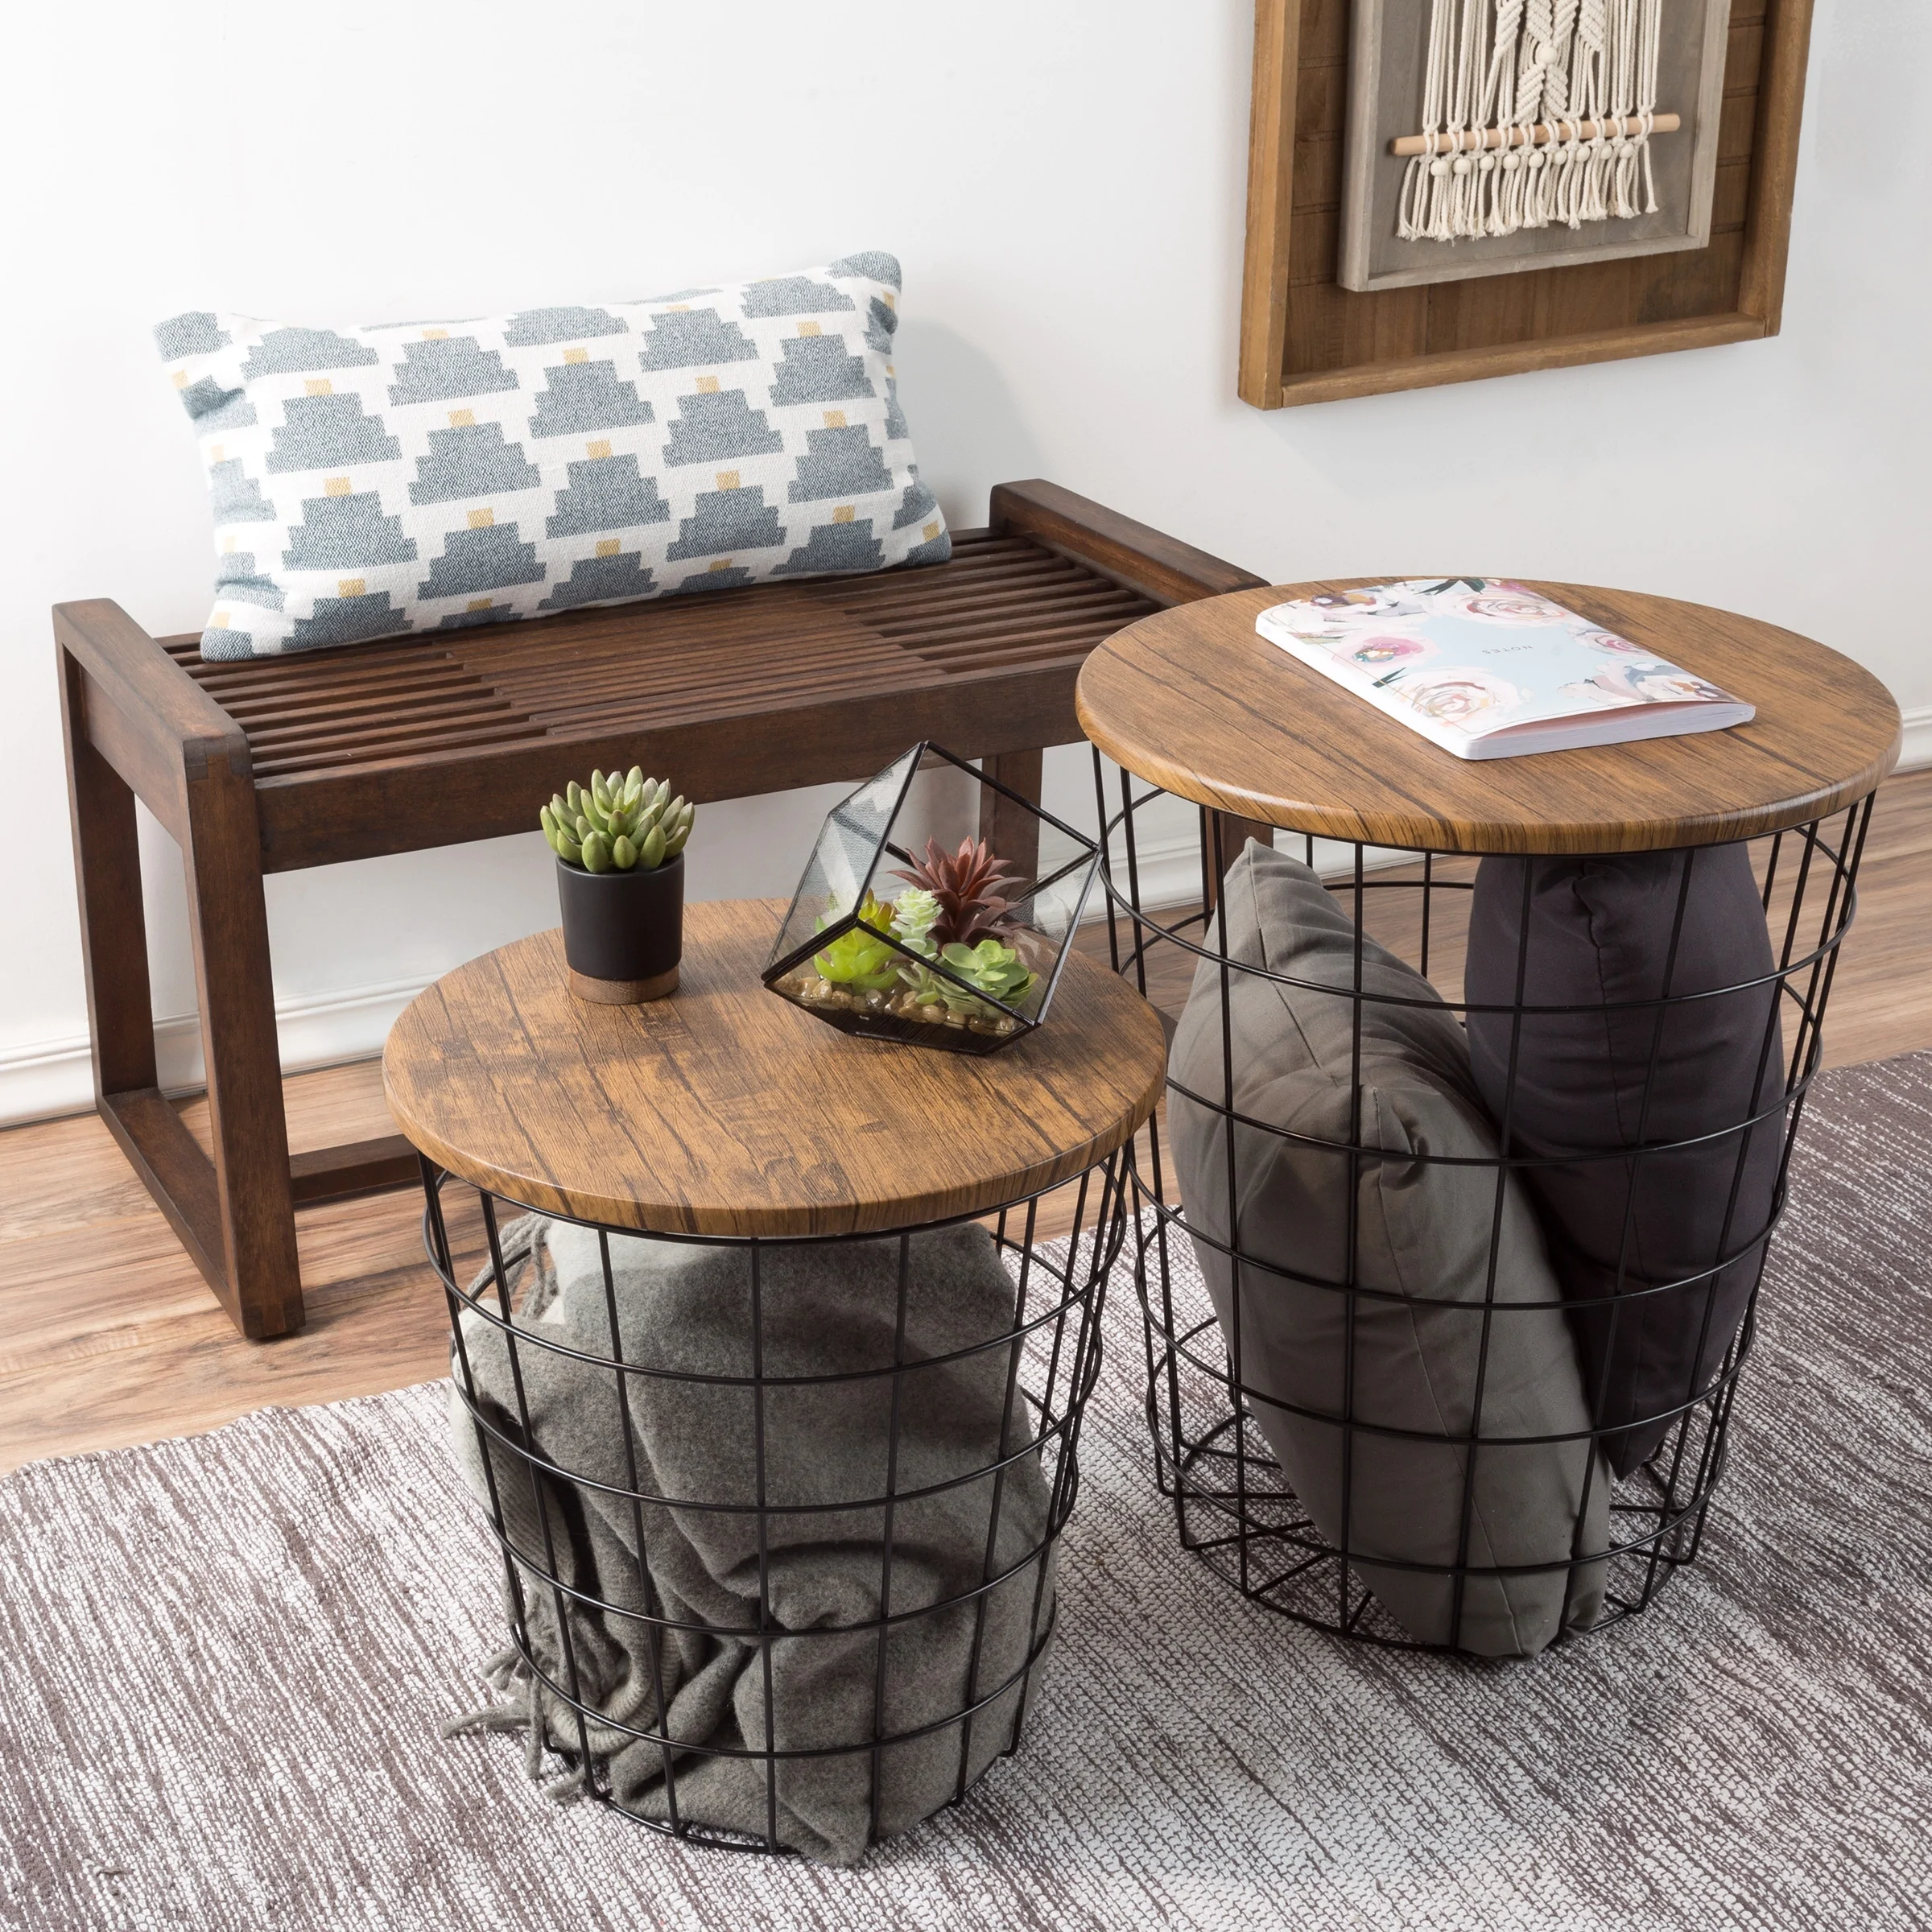 nesting end tables with storage set convertible round metal basket veneer wood top accent side lavish home wire table free shipping today large bedside green office and coffee